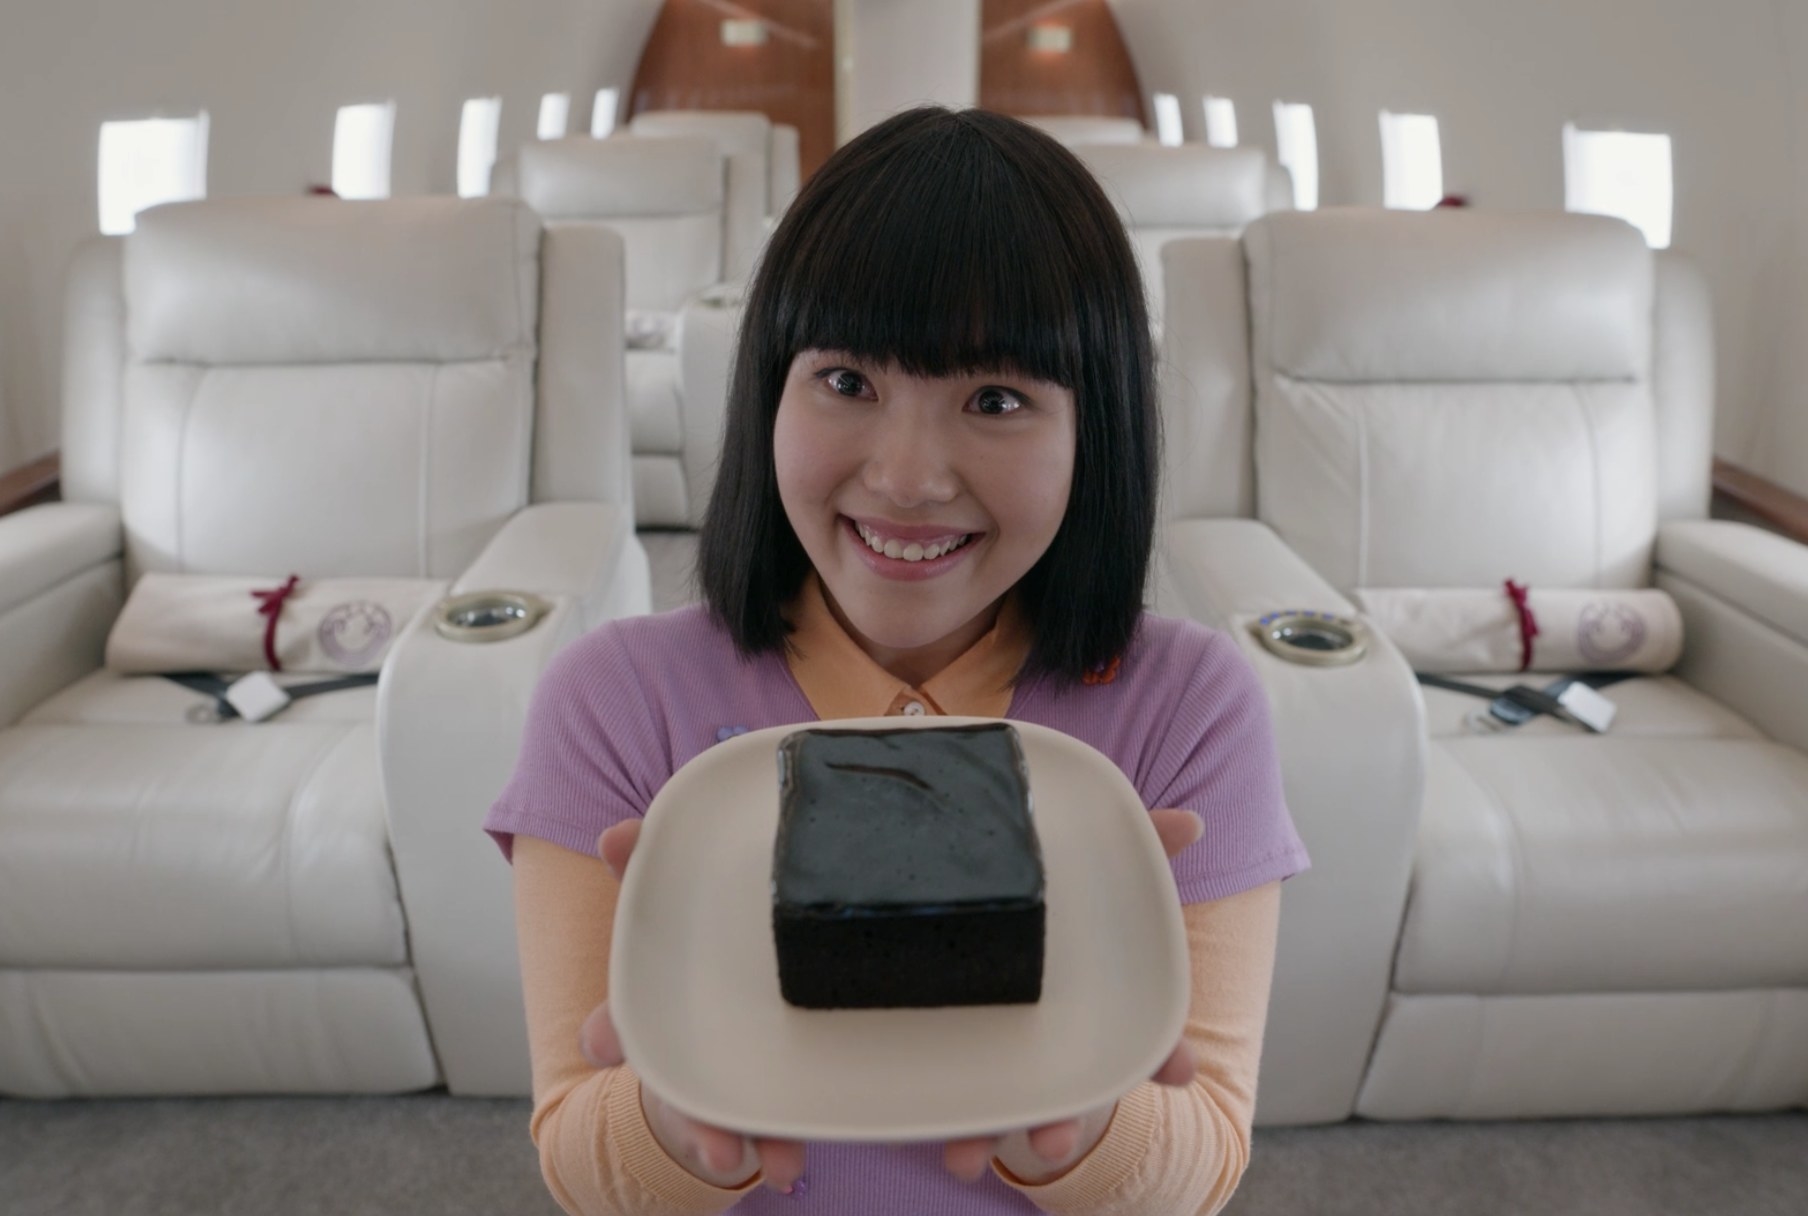 Linh holding a piece of cake on the plane in &quot;The Wilds&quot;